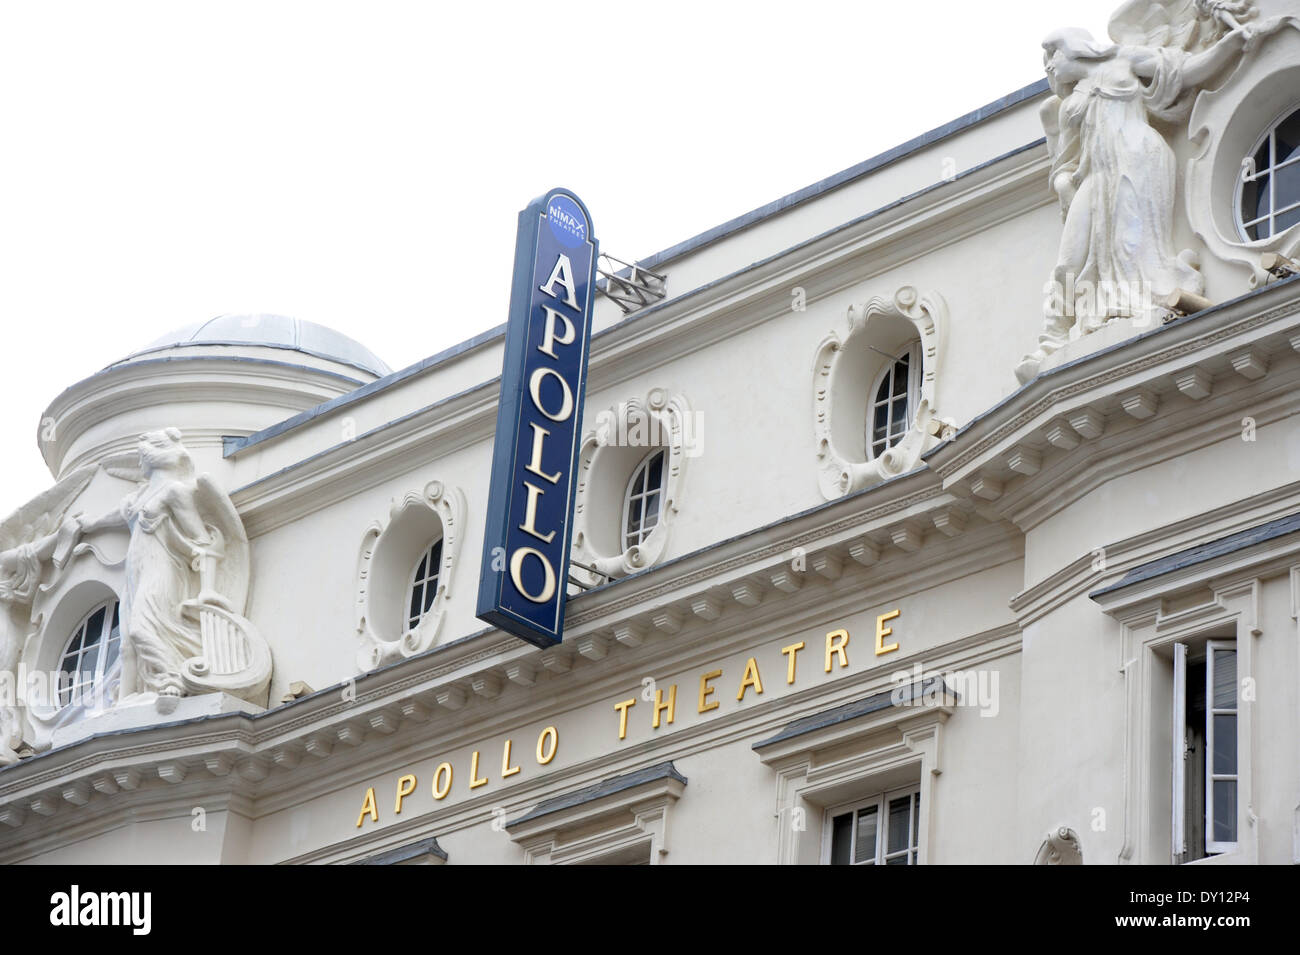 London, UK. 2nd April 2014. Apollo Theatre open for business after major  renovation following the ceiling collapse during a performance of The Curious Incident of the dog in the Night-Time Credit:  JOHNNY ARMSTEAD/Alamy Live News Stock Photo